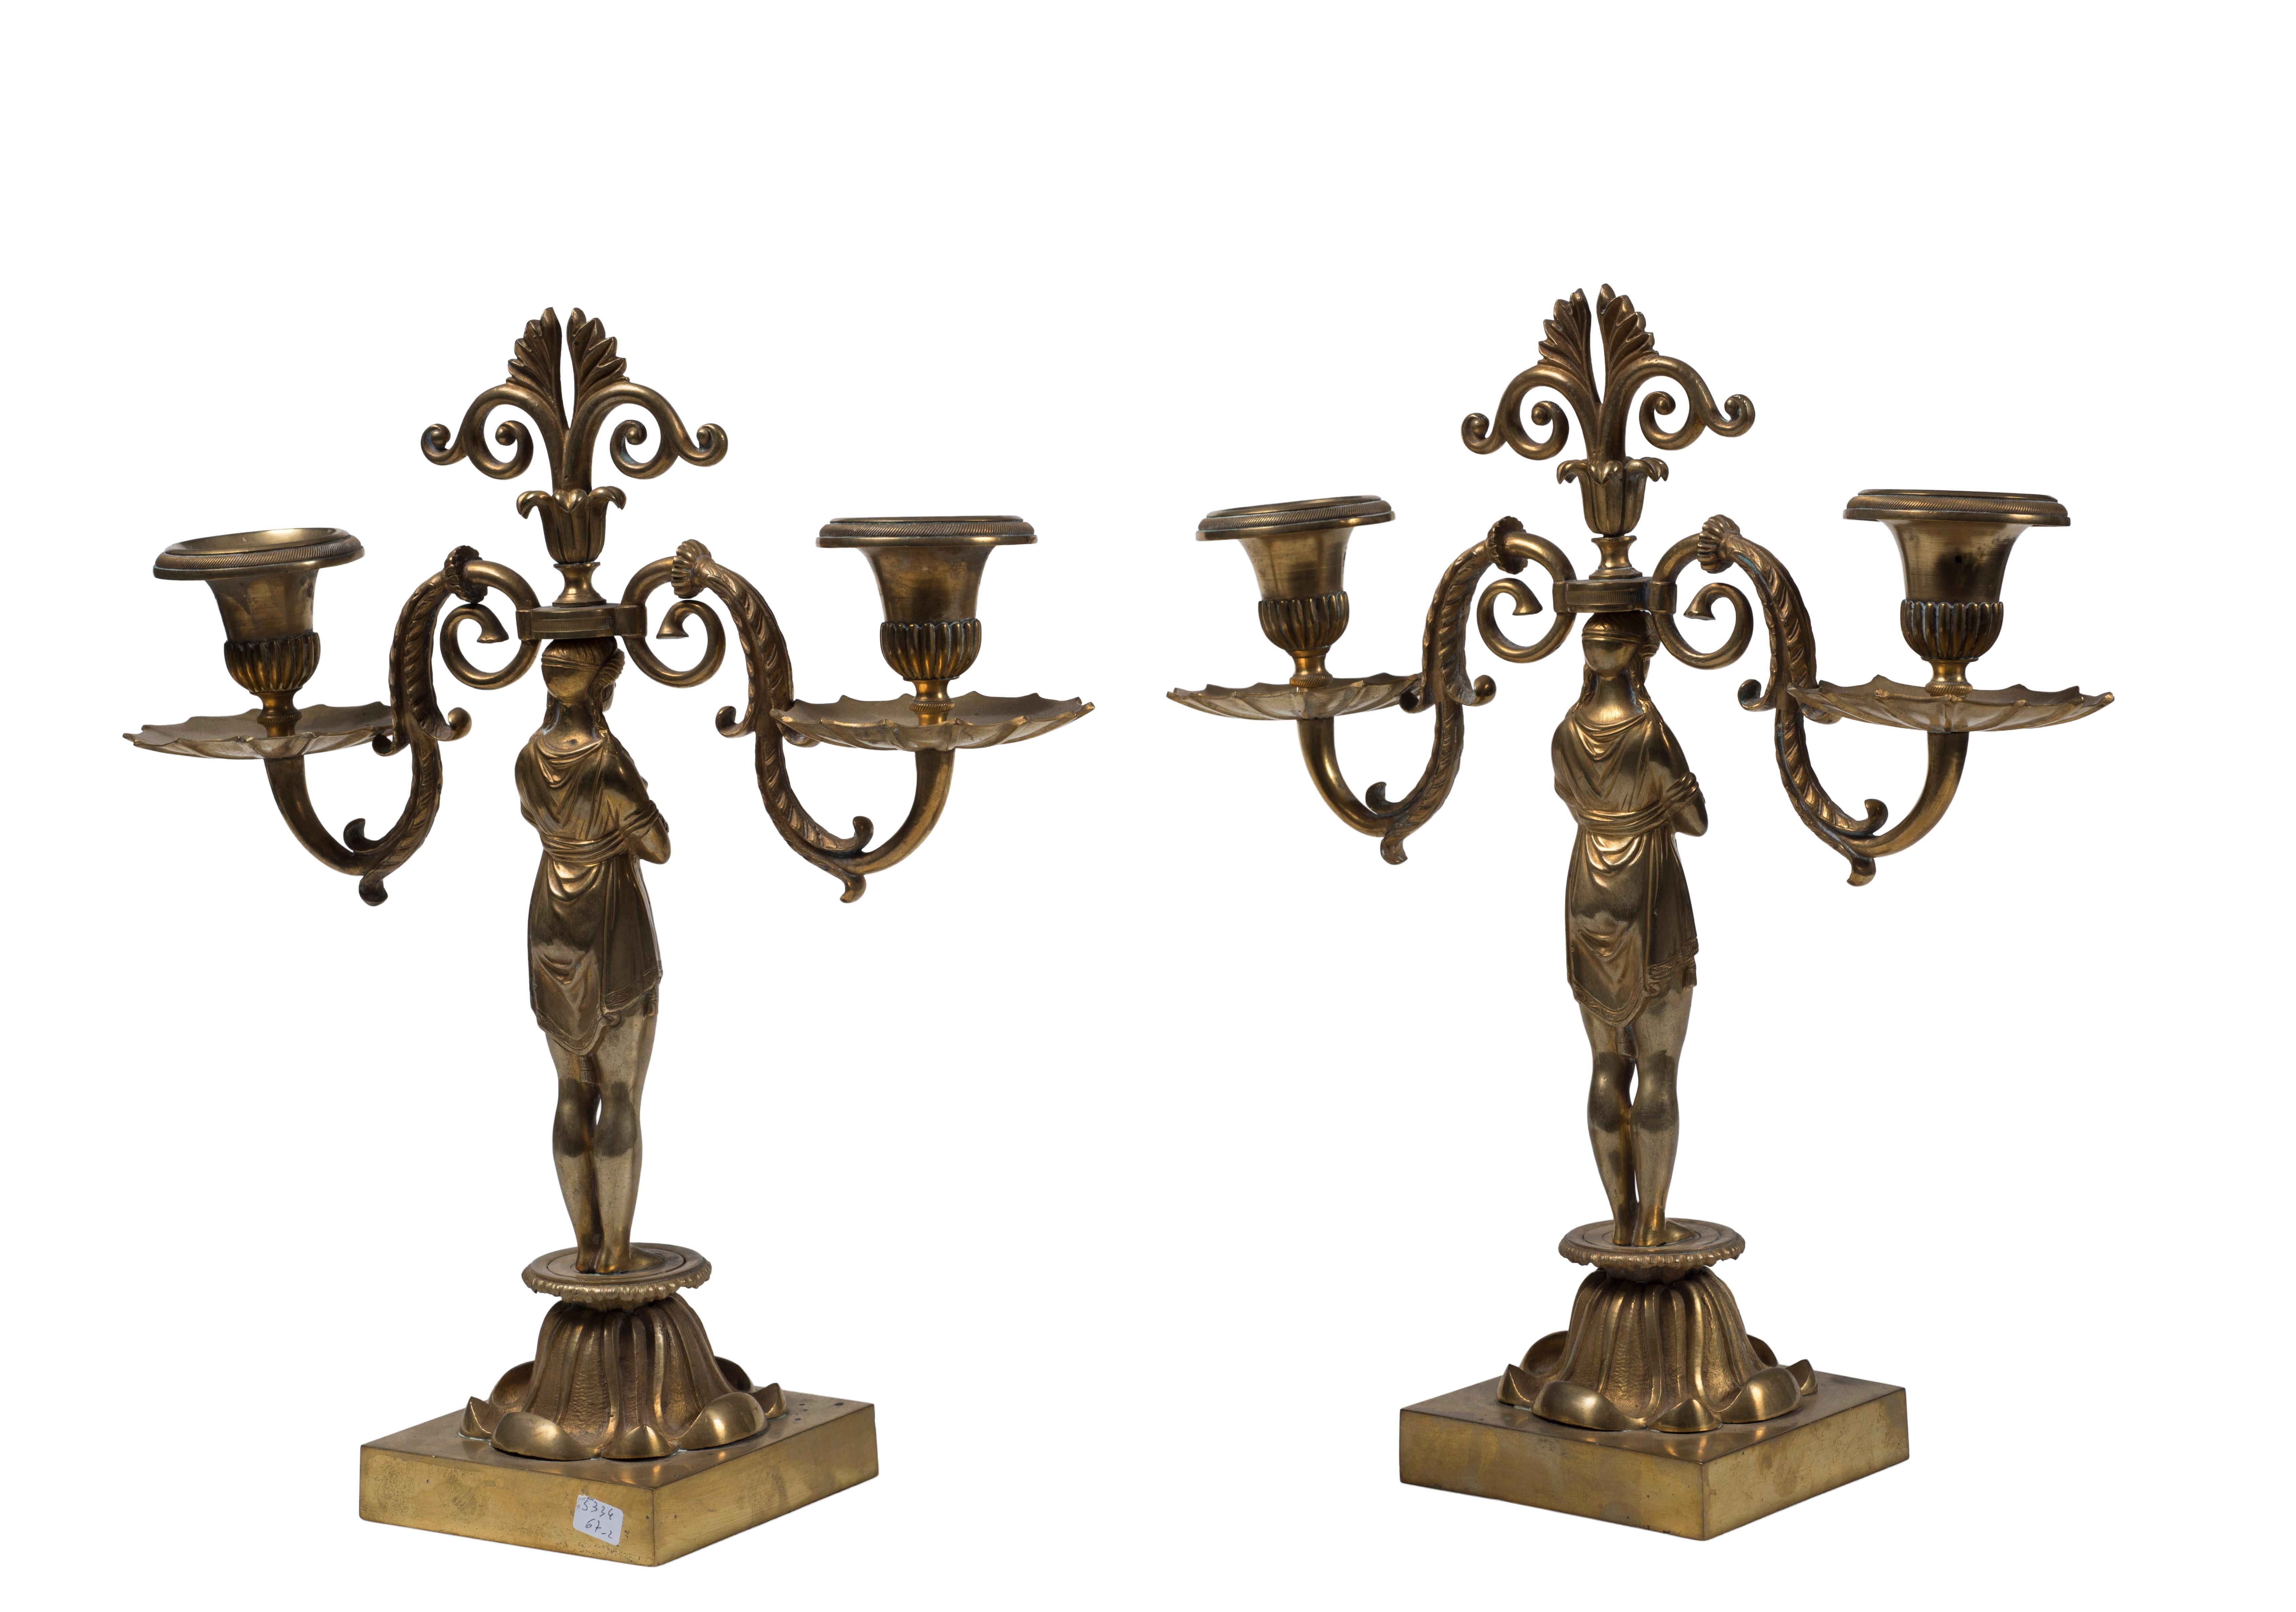 Pair of candleholder is an original decorative object realized at the end of the 19th century by French manufacture.

The artwork has two arms in gilded bronze with a capital base surmounted by a sculpture of a female figure that supports the